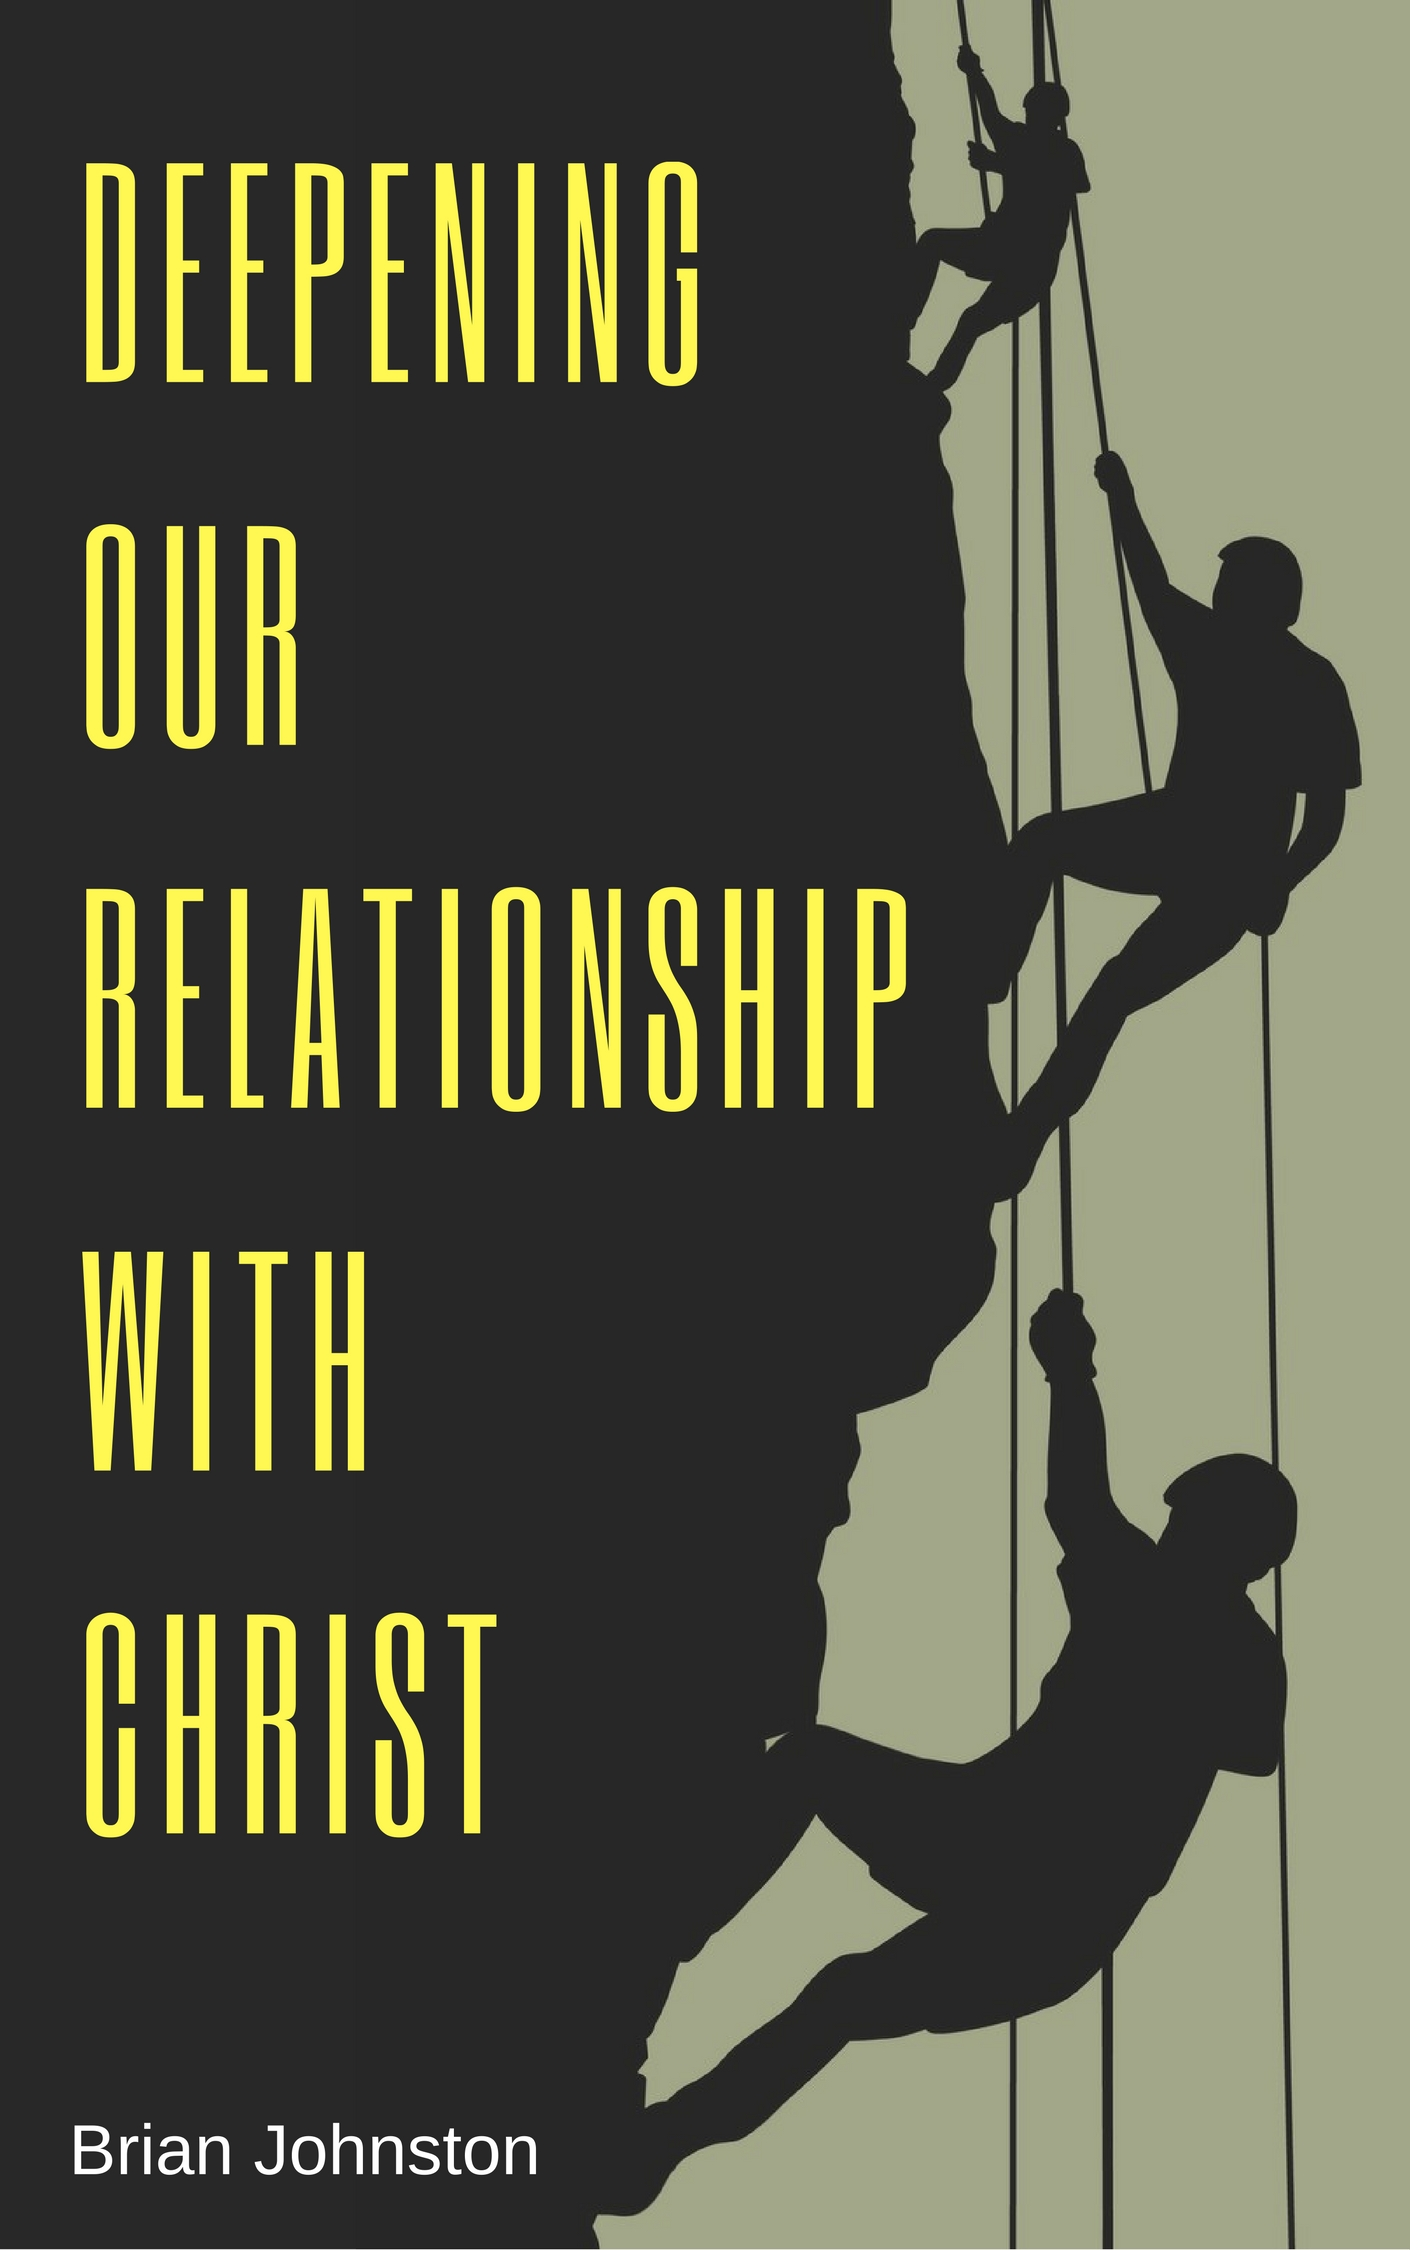 Deepening Our Relationship With Christ: Part 4  - In Following Him